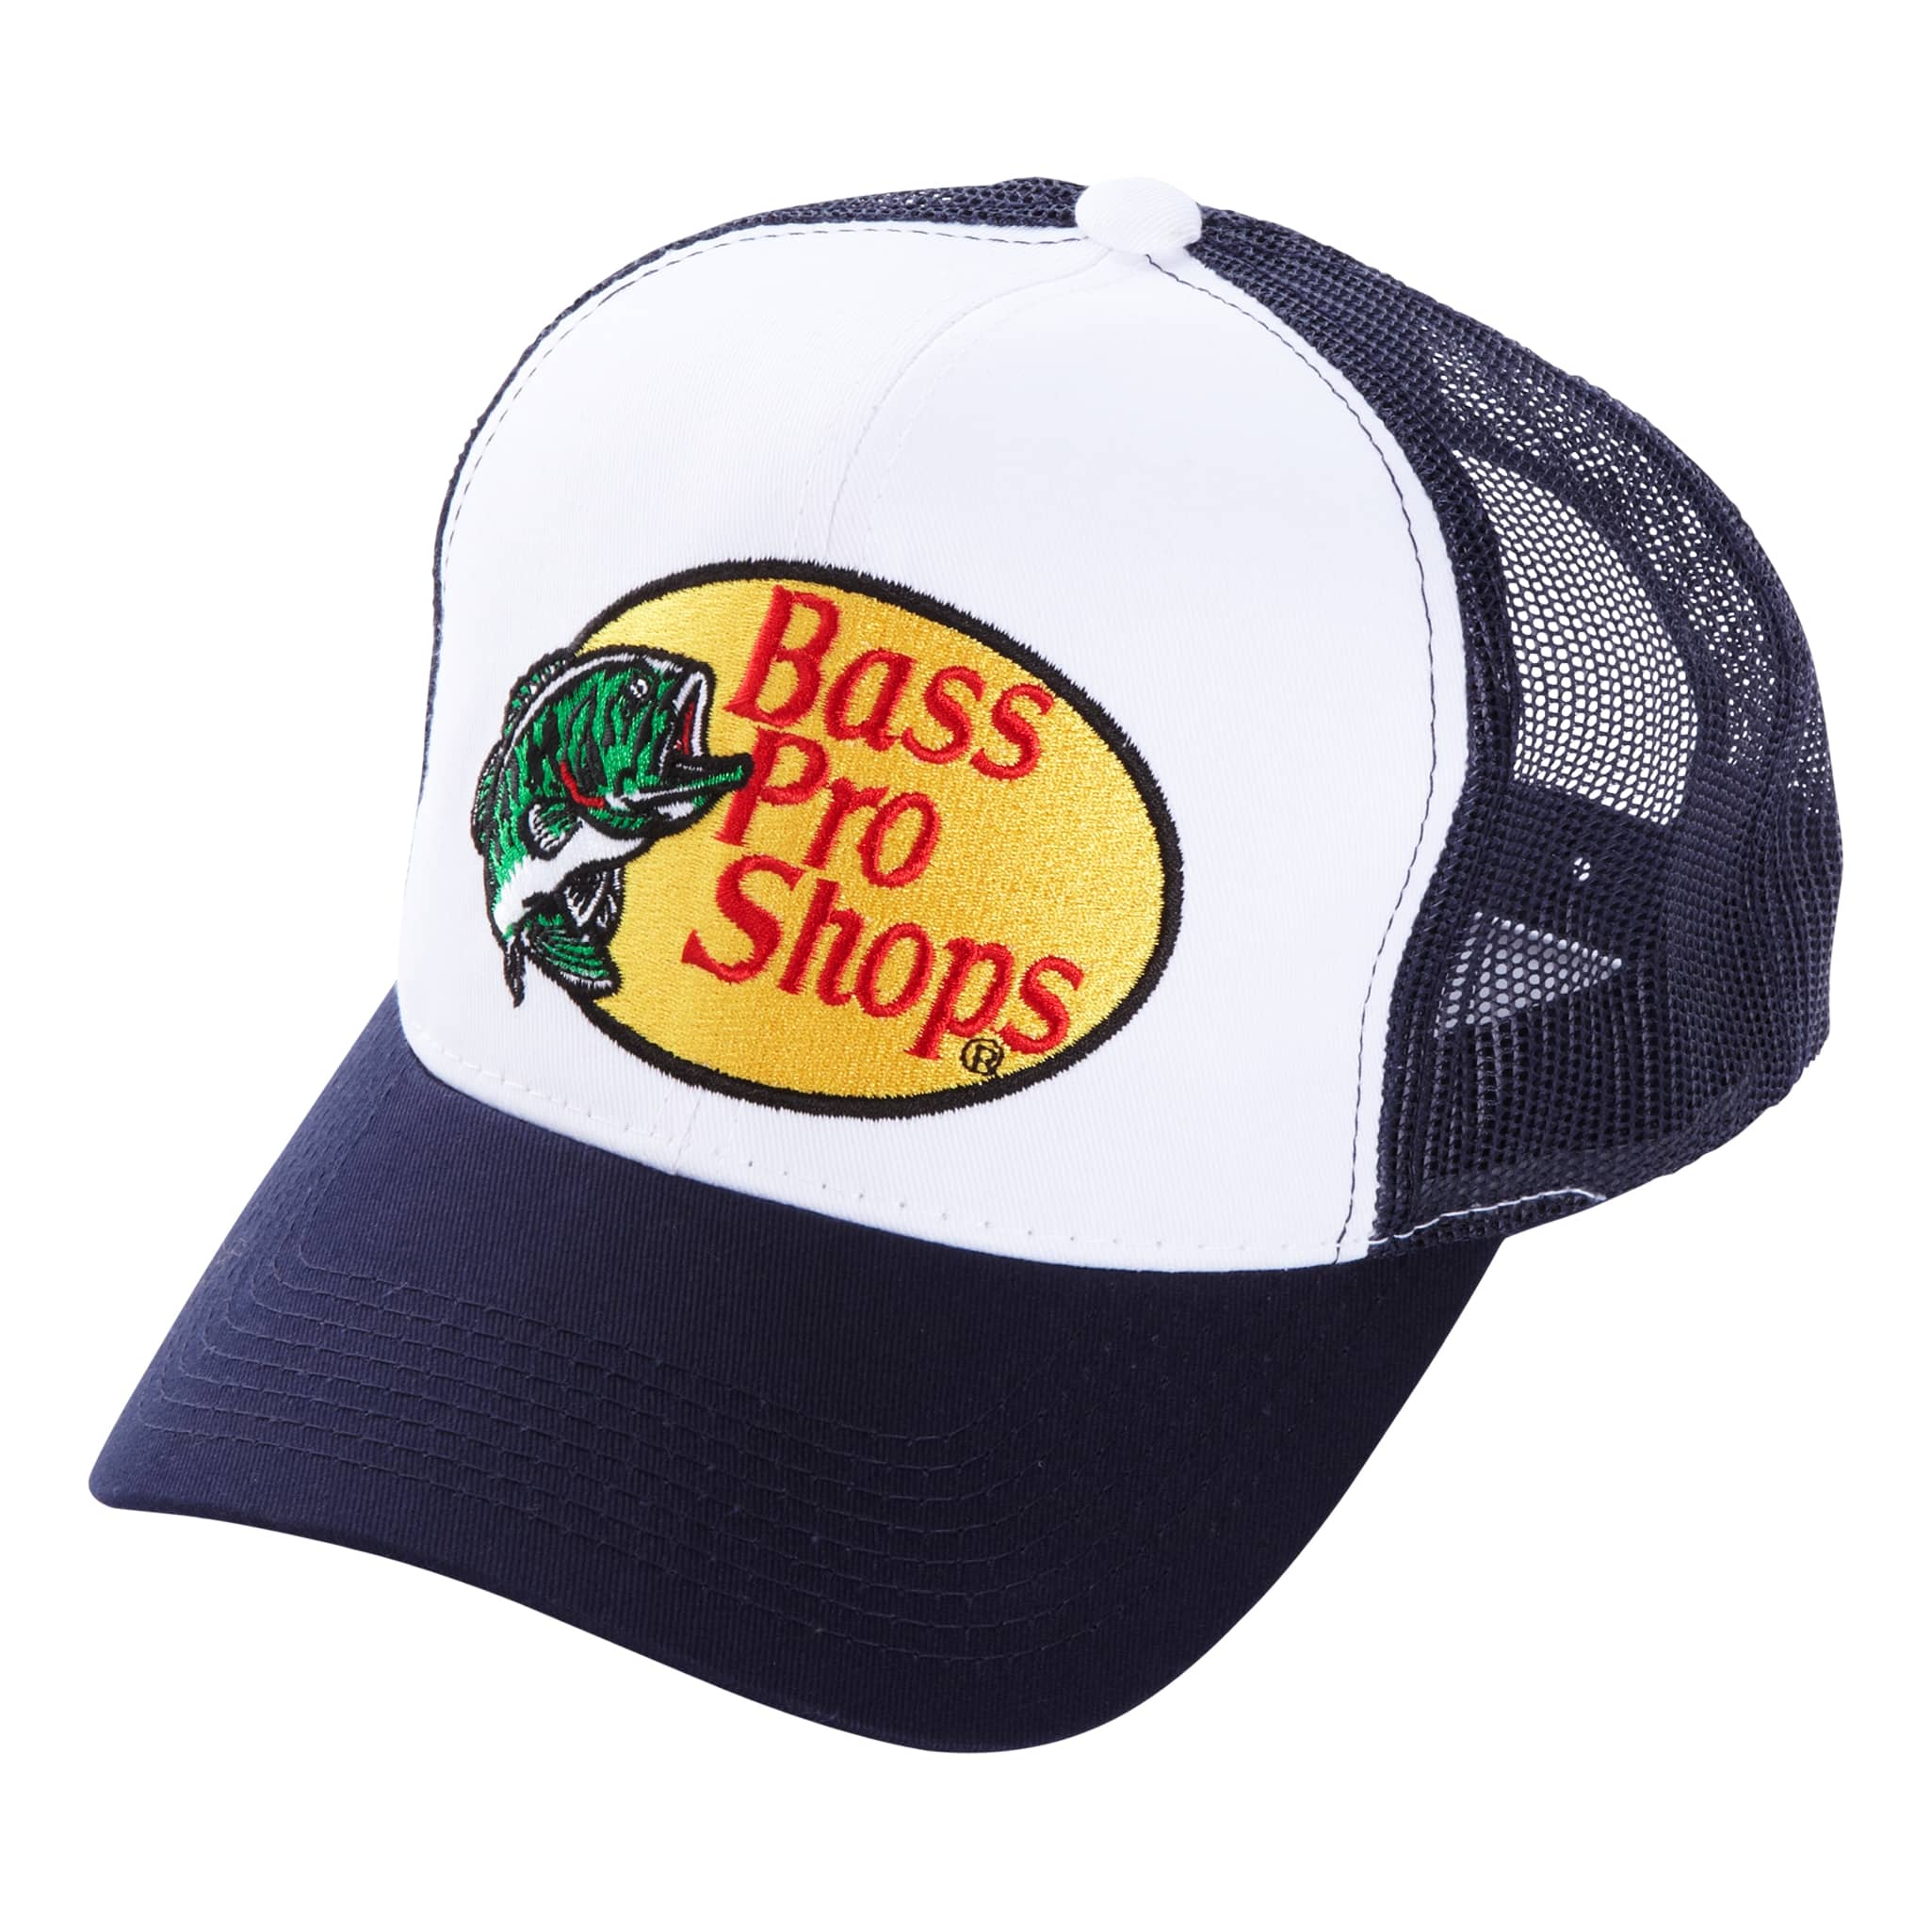 Bass Pro Shops® Embroidered Logo Mesh Caps - Navy